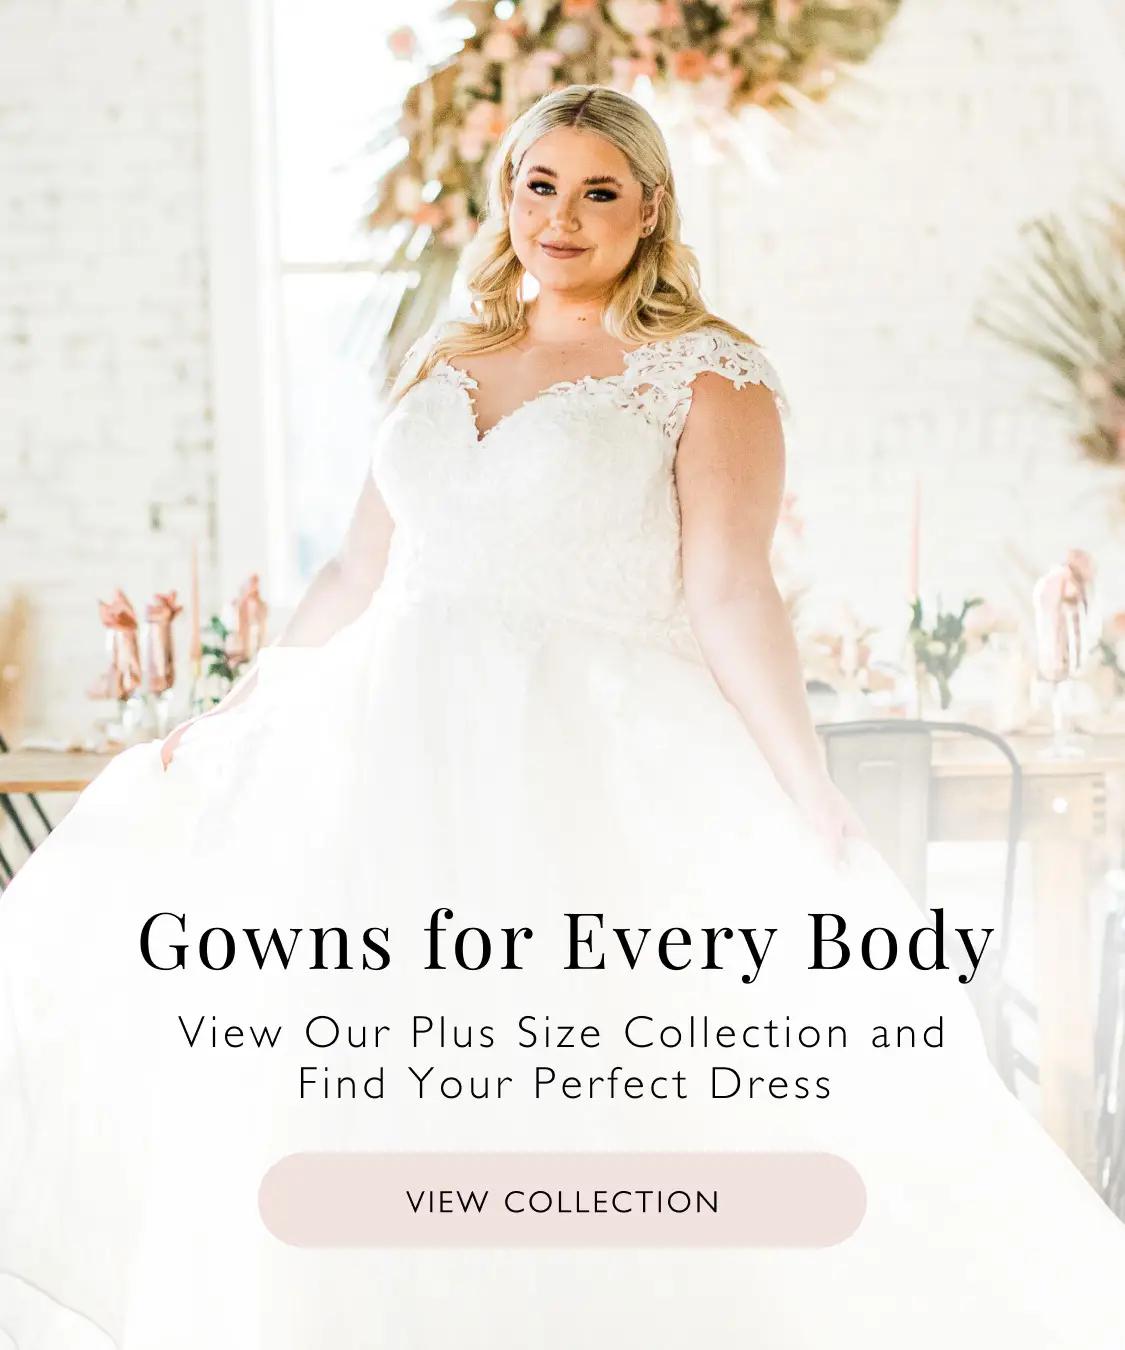 Bonny Bridal Wedding Dresses — Unforgettable Styles for Every